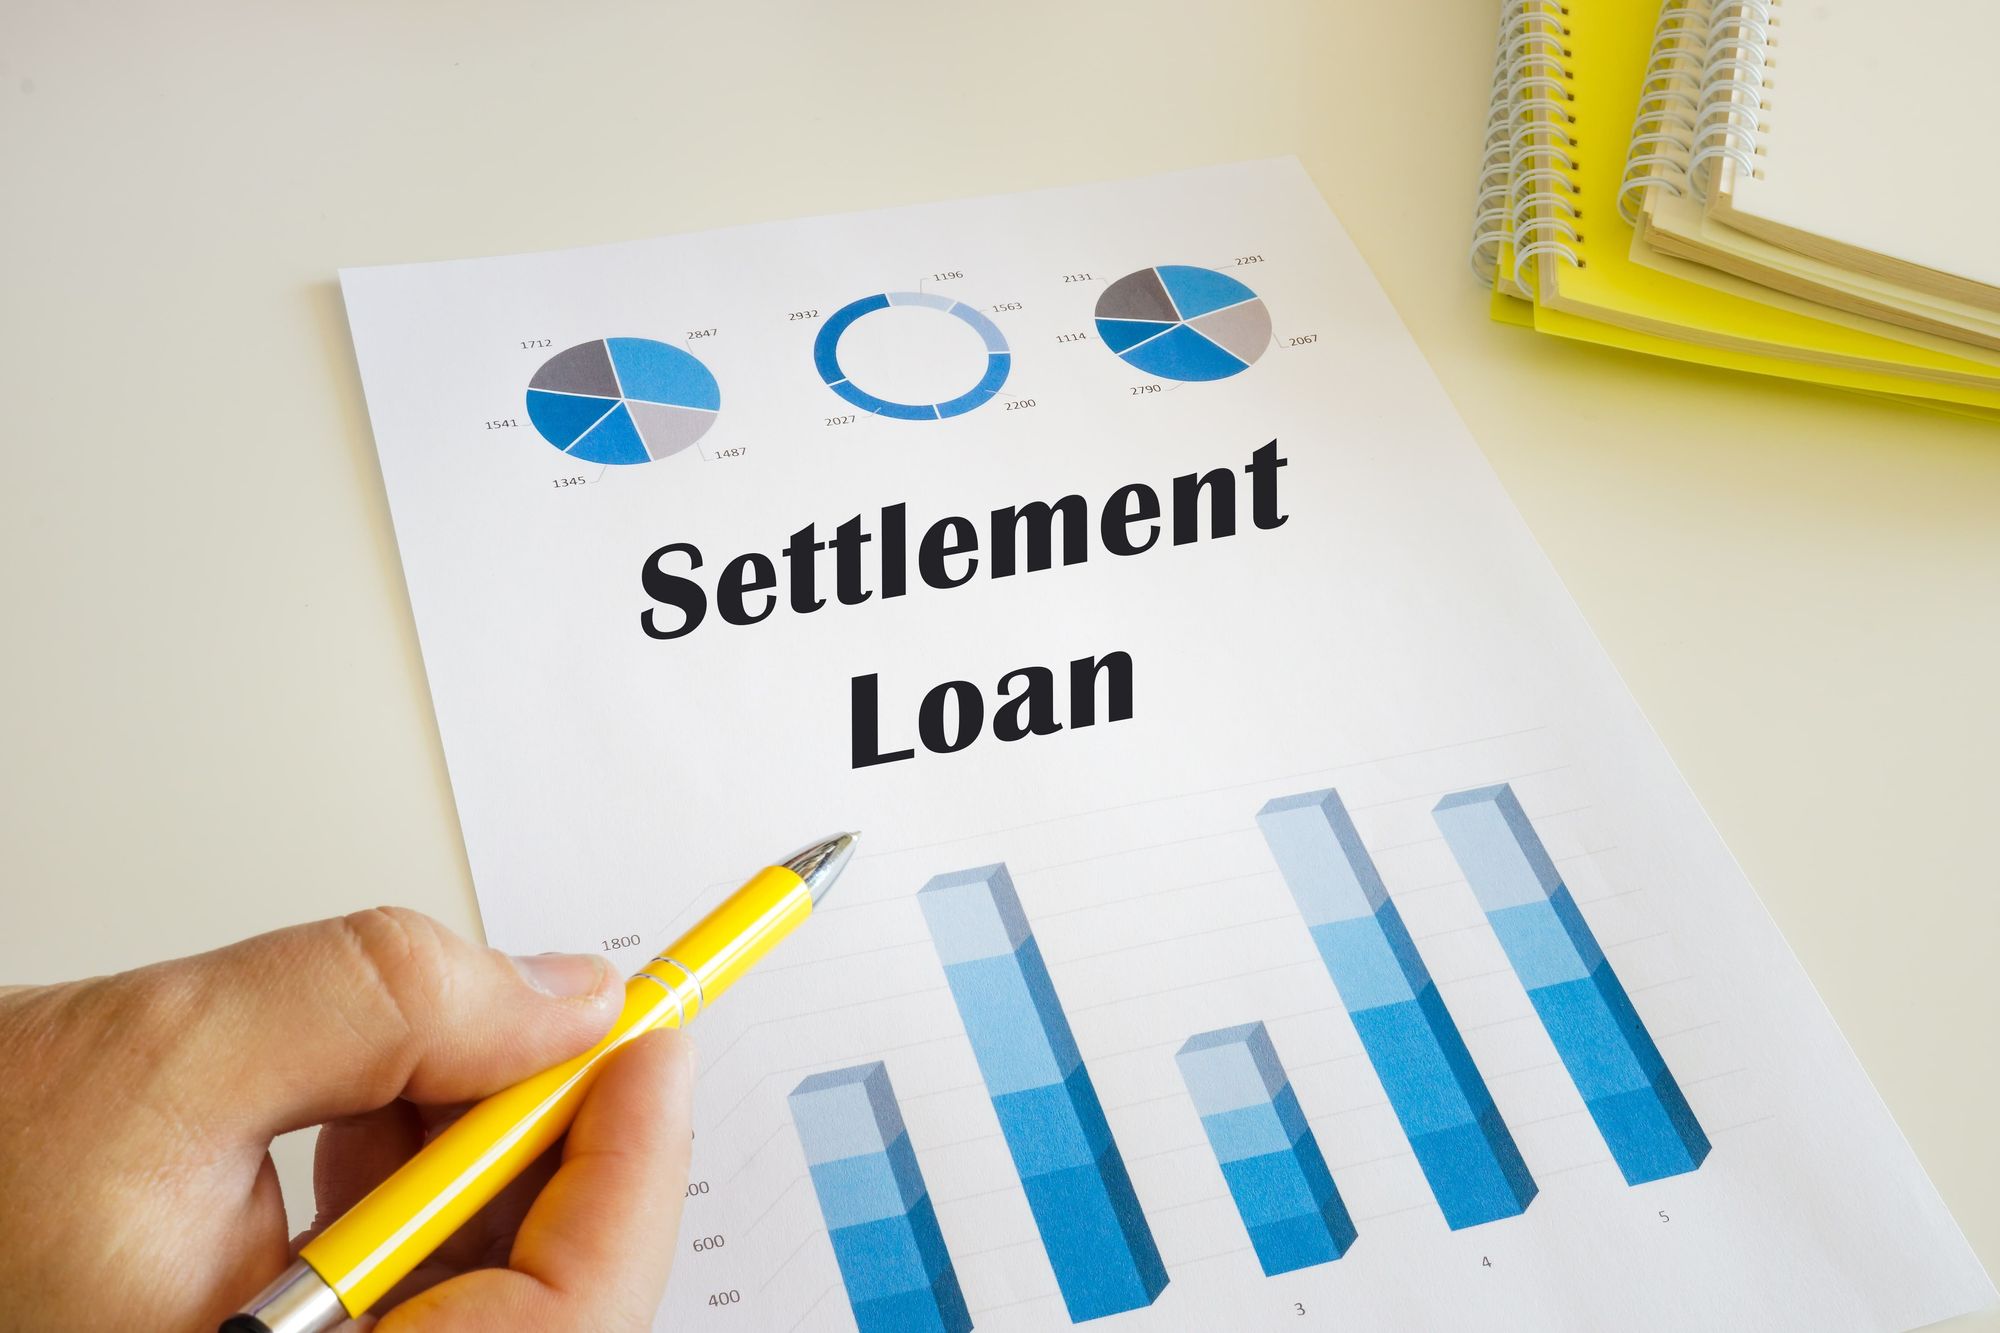 How To Access Non-profit Loan Settlement Resources